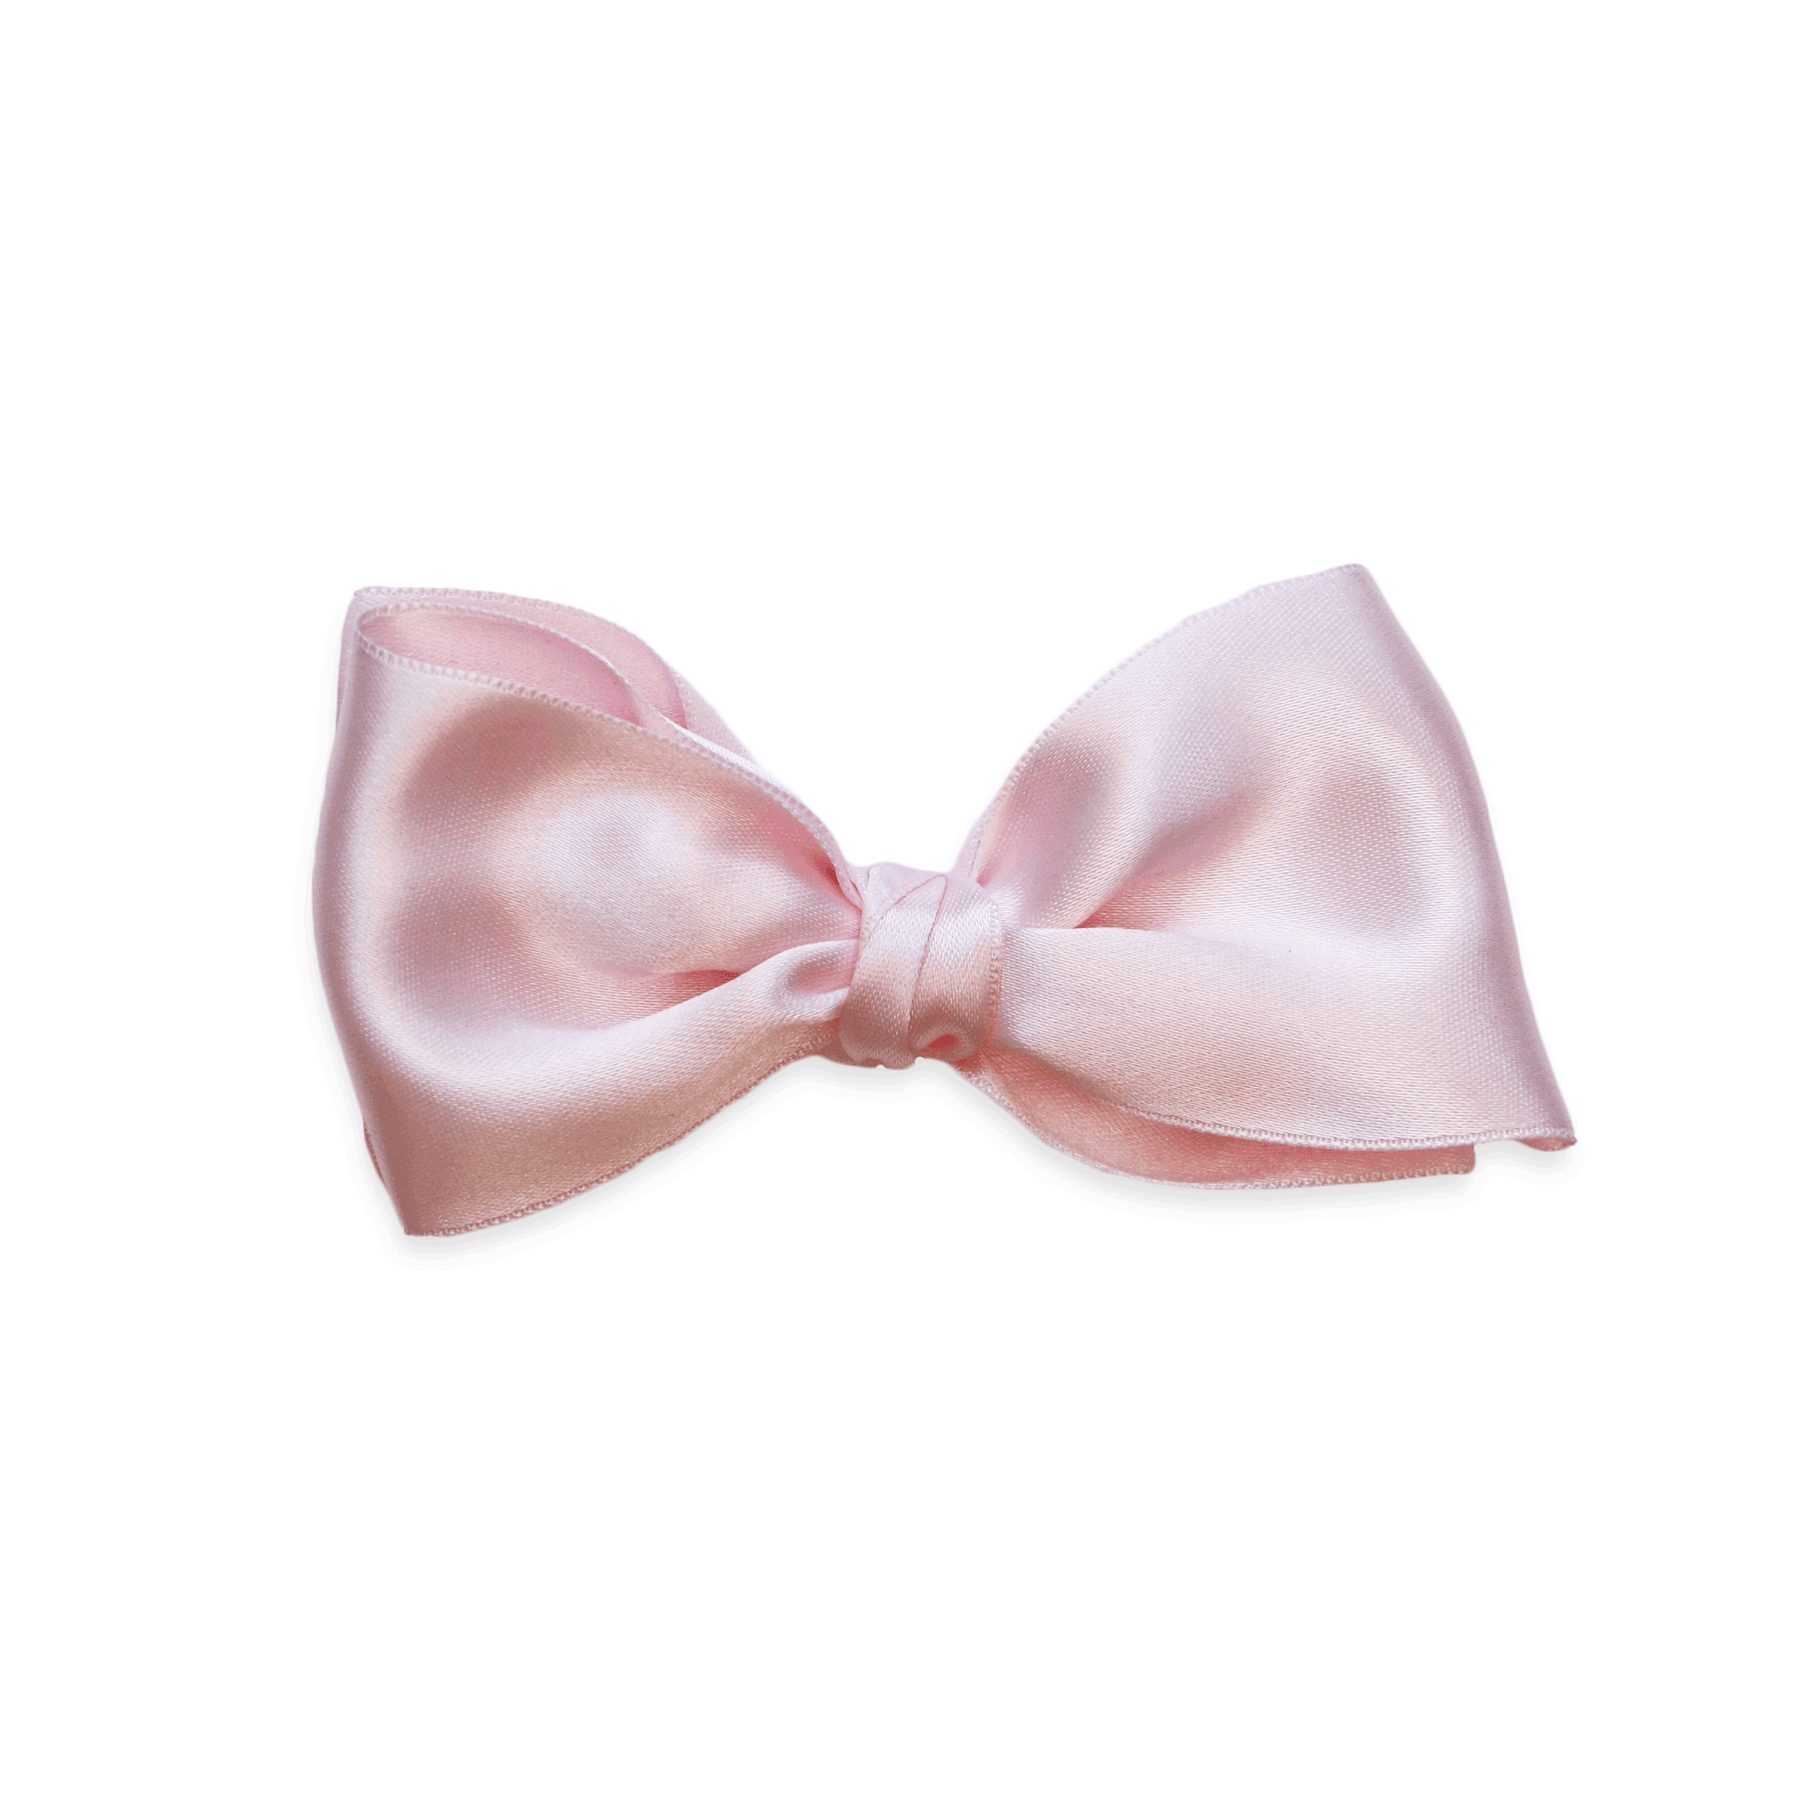 Satin Hair Bows for Women Mauve Pink